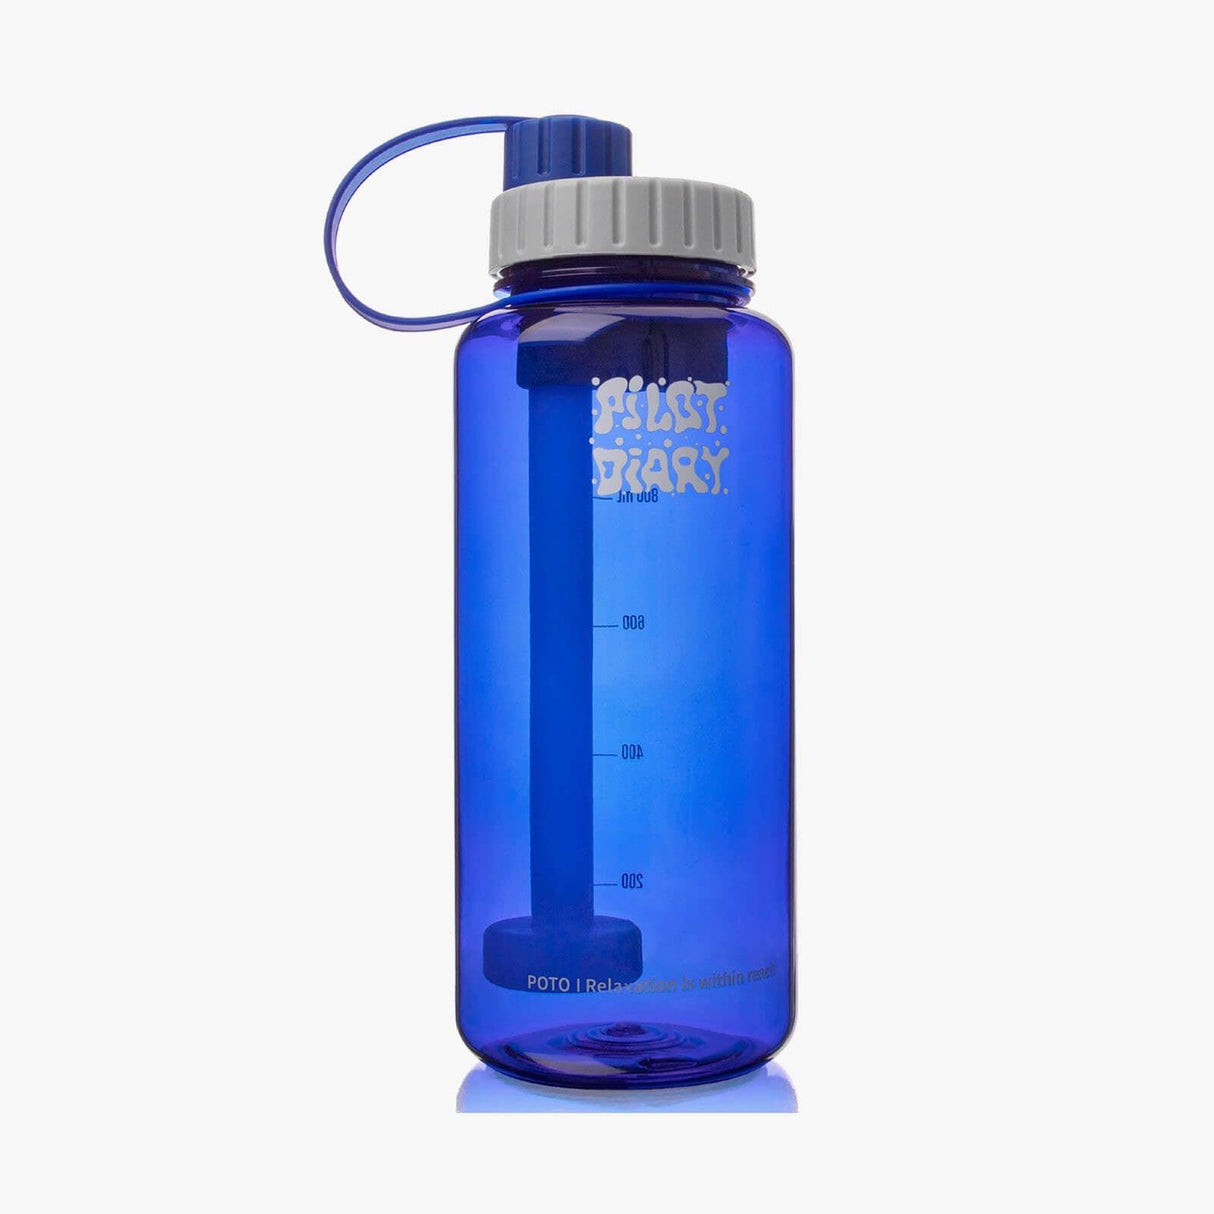 PILOT DIARY POTO Water Bottle Bong in Blue - Front View with Measurement Markings